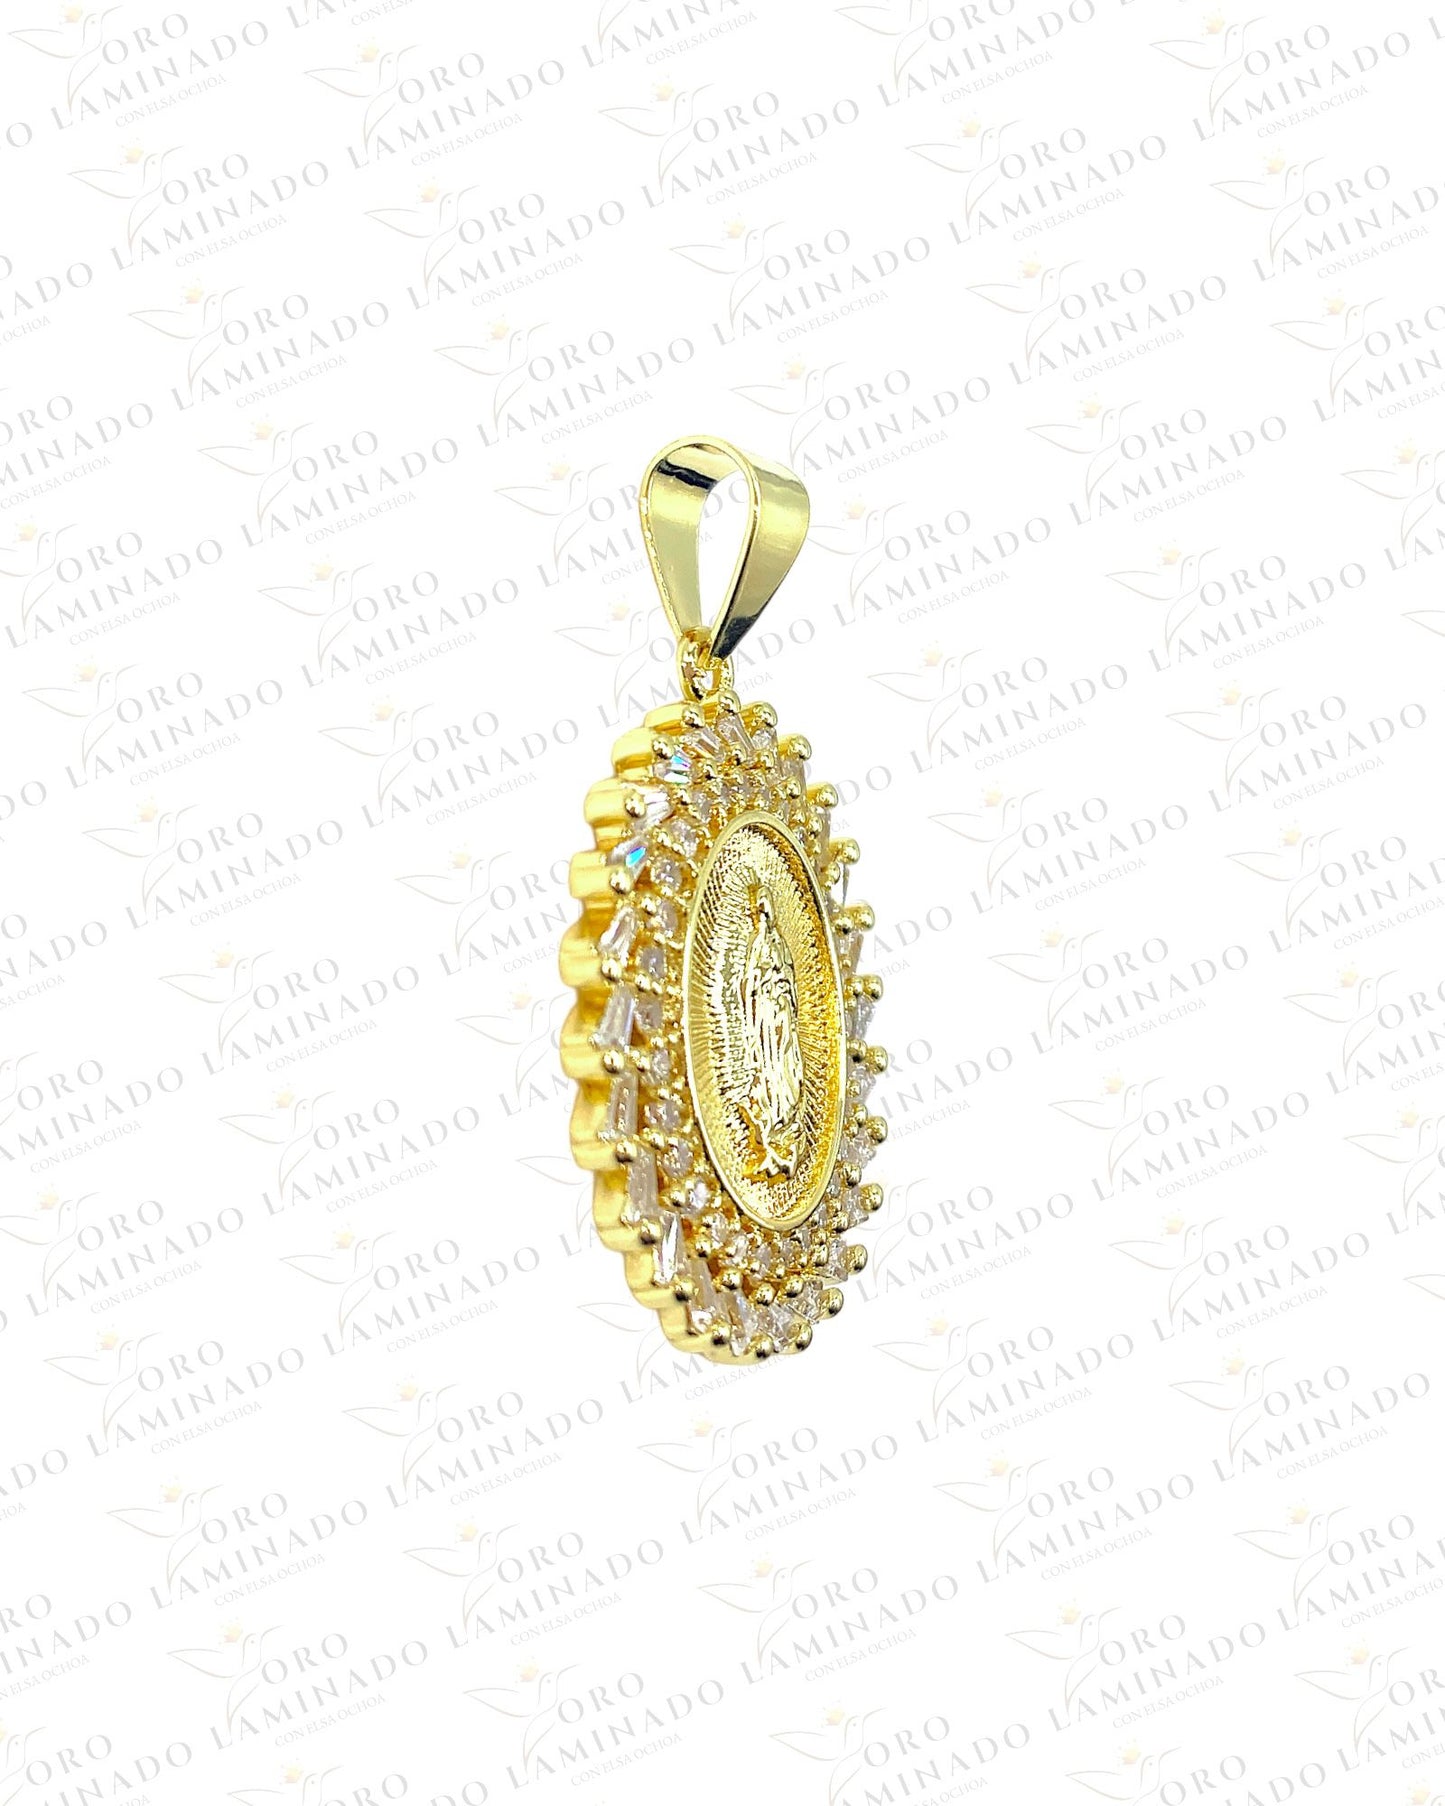 1.50" Oval Pendant with Virgin Mary Pendant B243